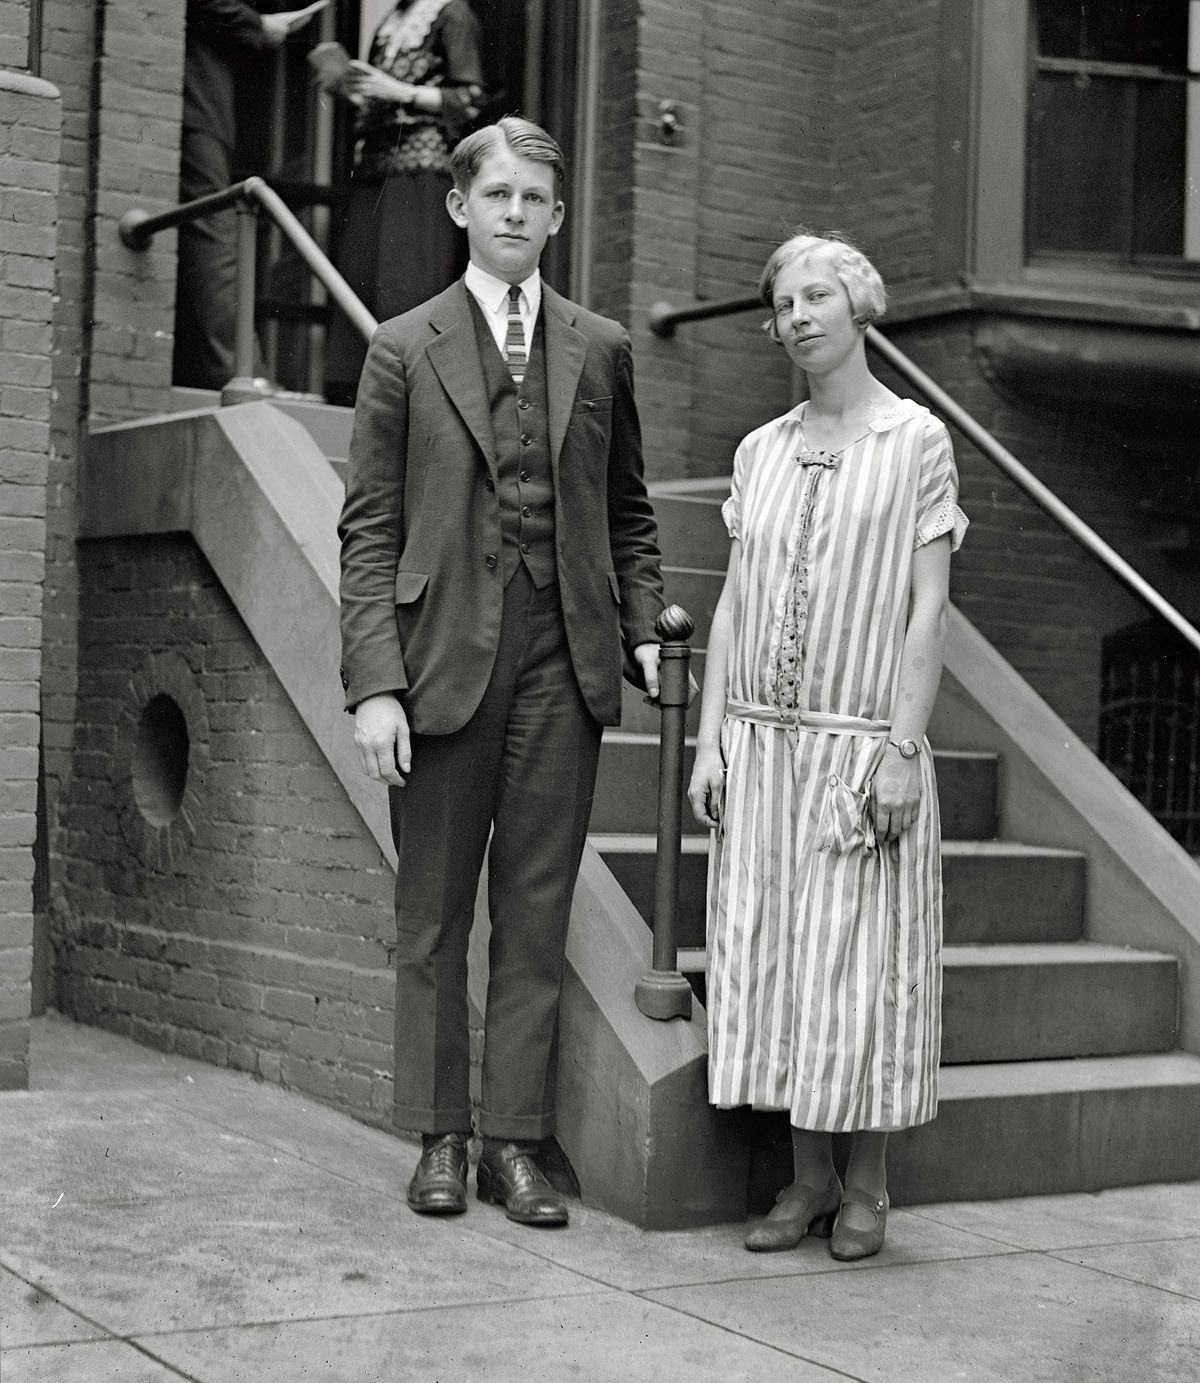 June 3, 1924. "Leonard and Edna Wilbur," children of Navy Secretary Curtis Wilbur. National Photo Company Collection glass negative. View full size.